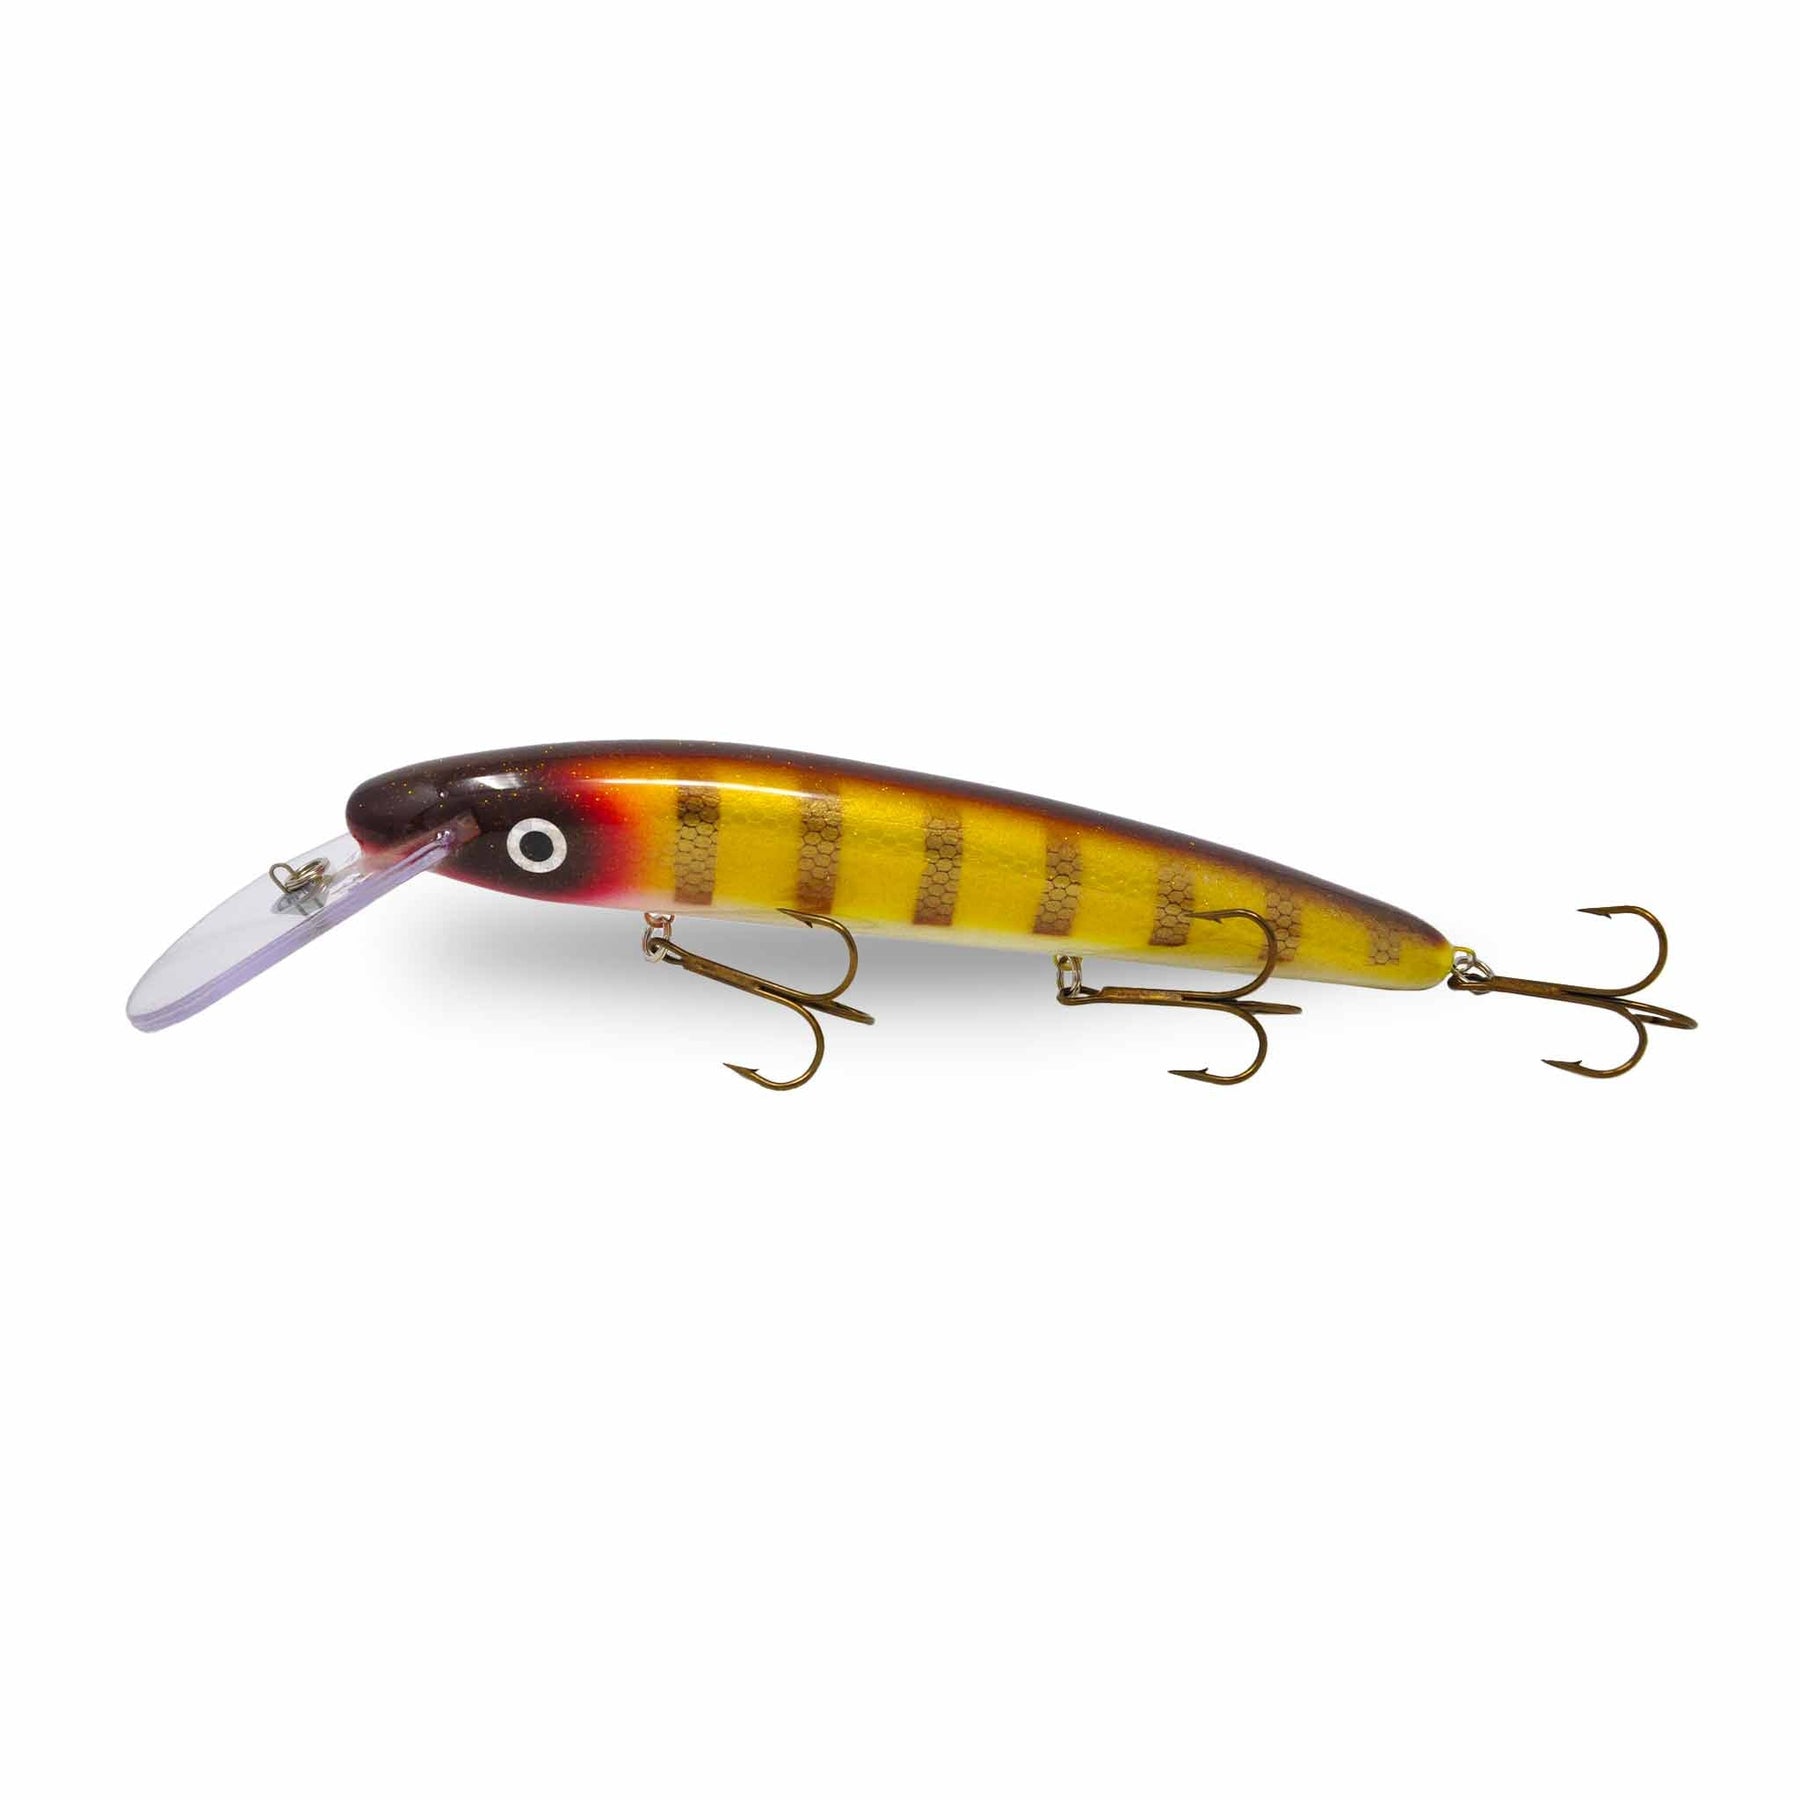 View of Crankbaits Slammer 10" Deep Minnow Crankbait Walleye available at EZOKO Pike and Musky Shop